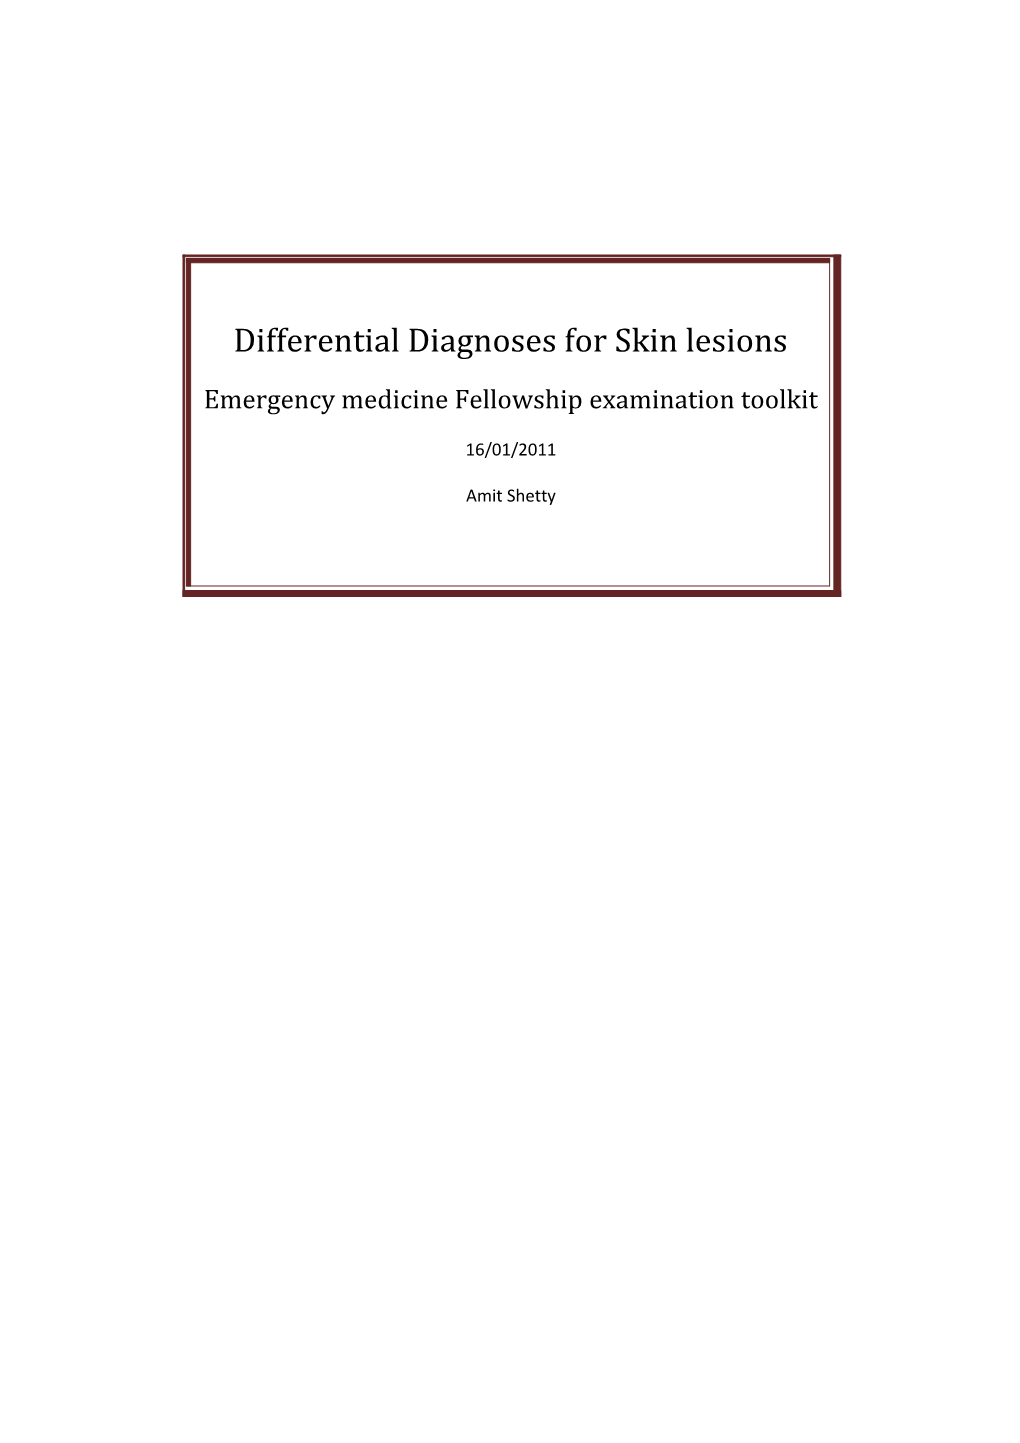 Differential Diagnoses for Skin Lesions